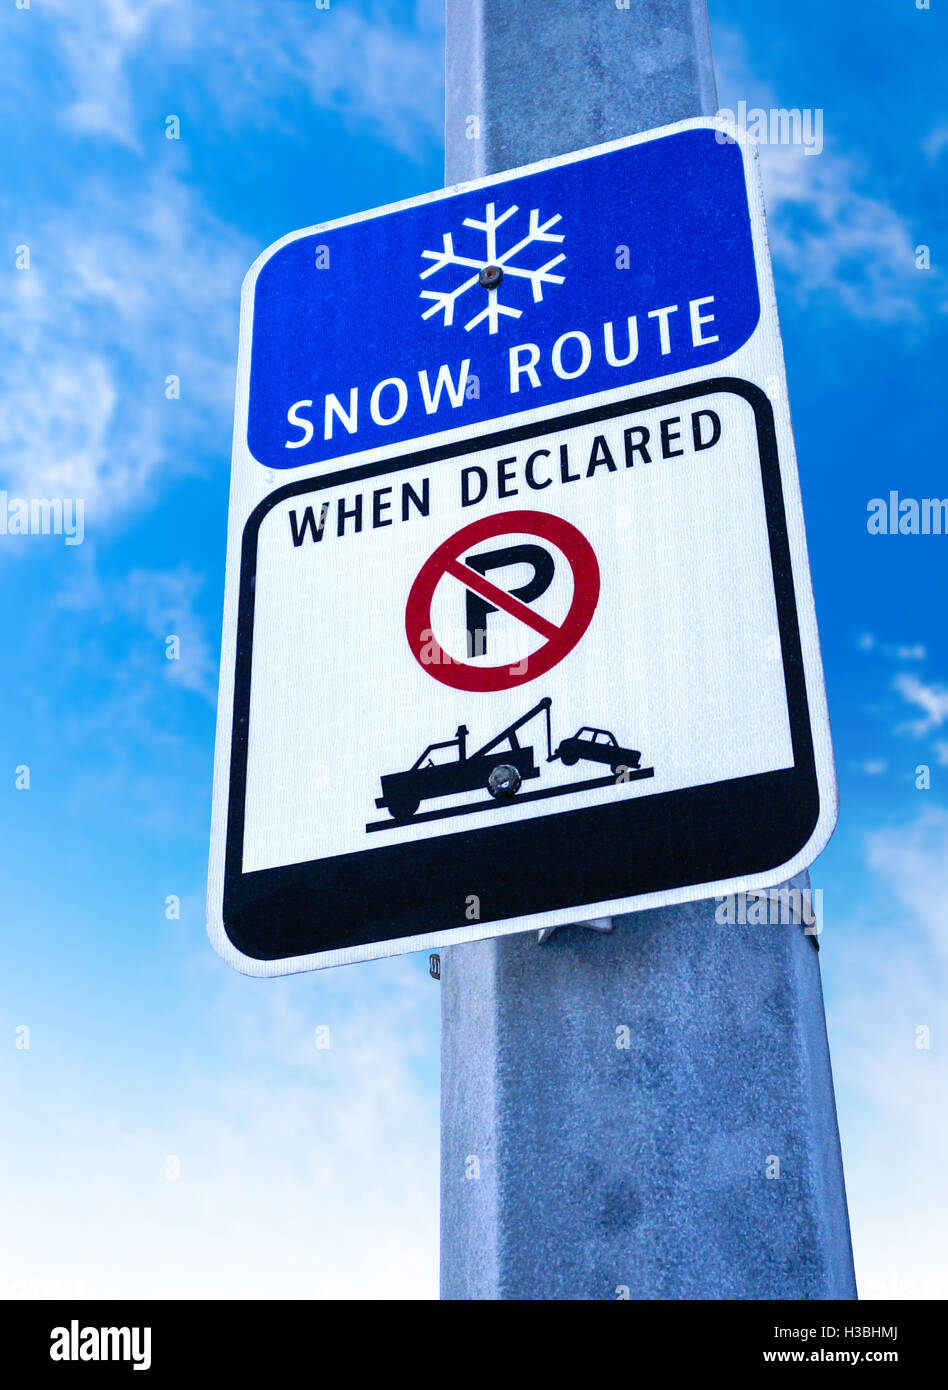 SNOW EMERGENCY ROUTE CAUTION ROAD STREET HIGHWAY SIGN 2 FEET X 2 FEET 